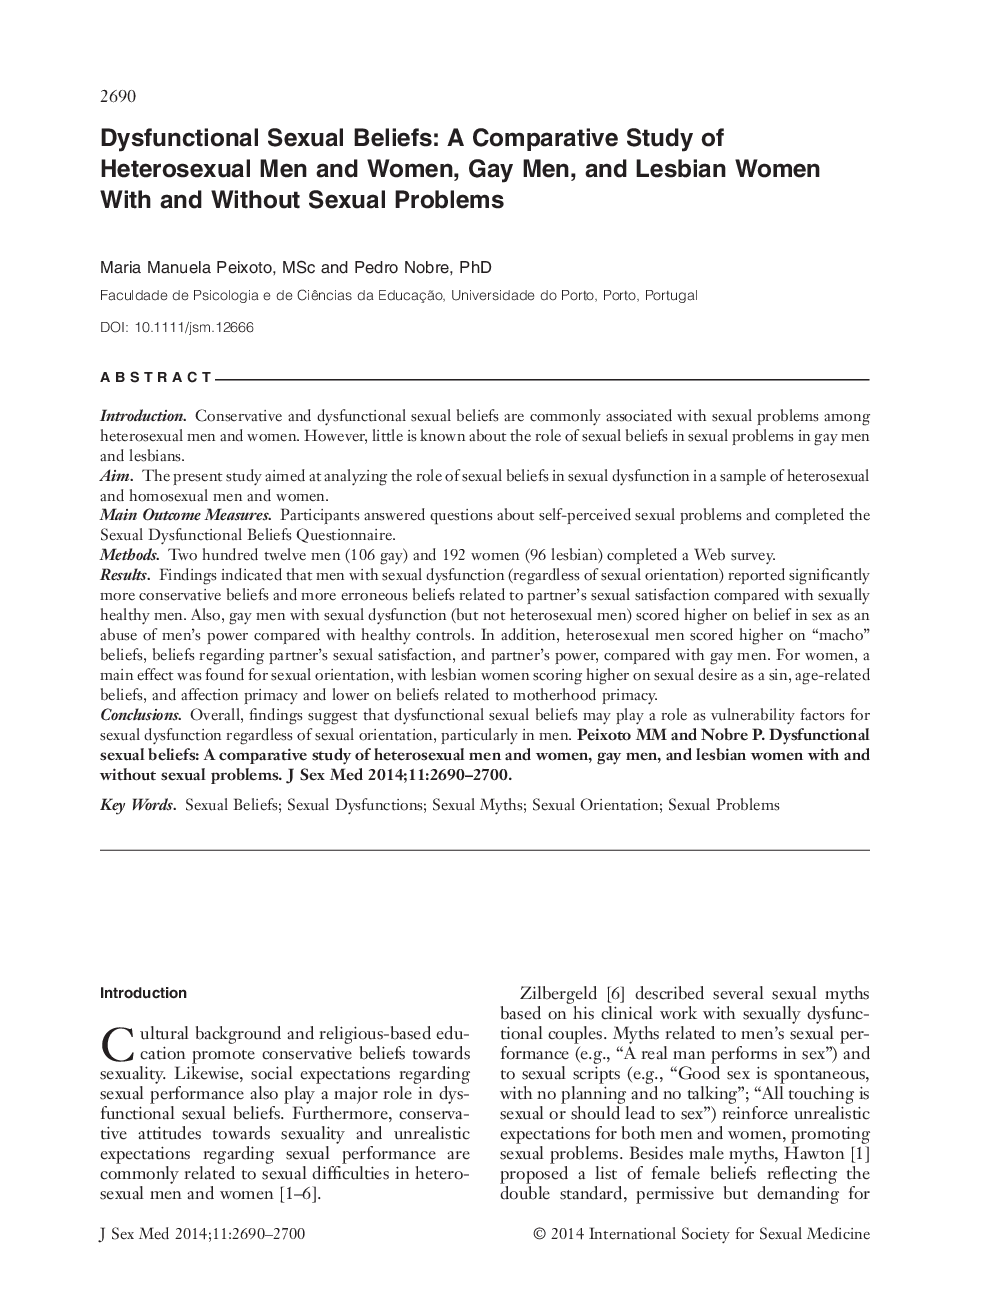 Dysfunctional Sexual Beliefs: A Comparative Study of Heterosexual Men and Women, Gay Men, and Lesbian Women With and Without Sexual Problems 